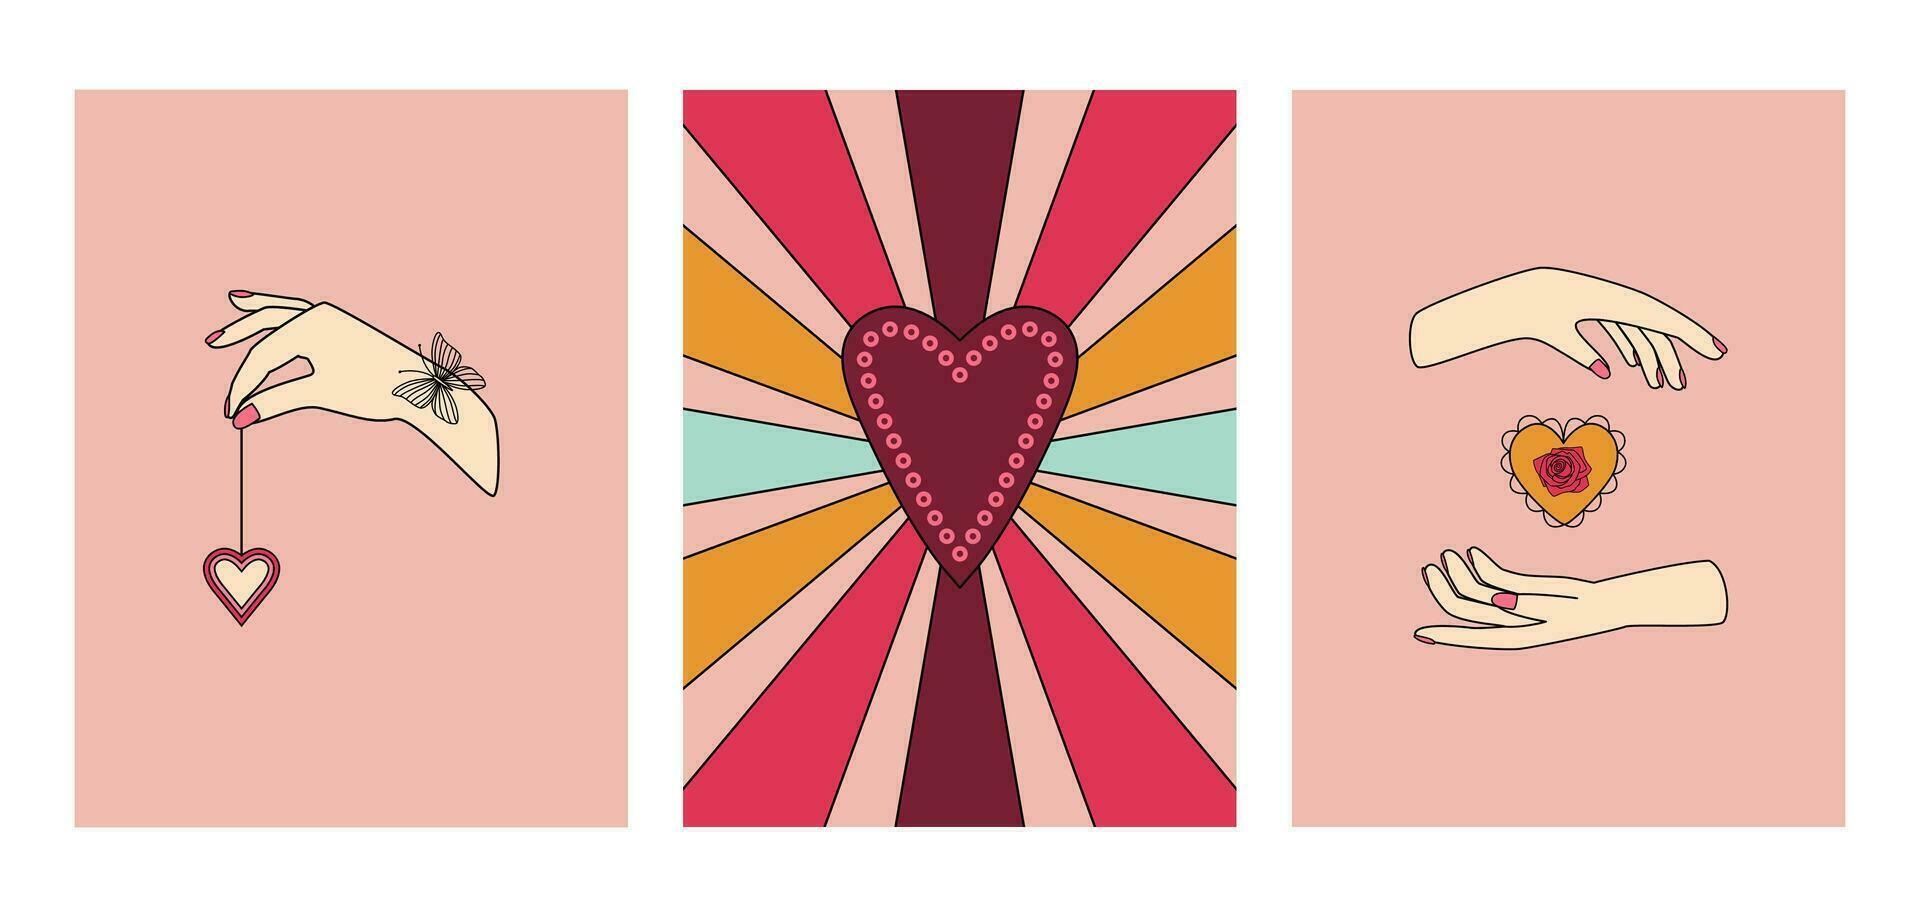 Set of retro vintage Valentine's day greeting cards, flyers, posters. Romantic layout template in groovy mystic style. Pink girly colors. Hands holding hearts, hypnotic swirl background, rose. vector